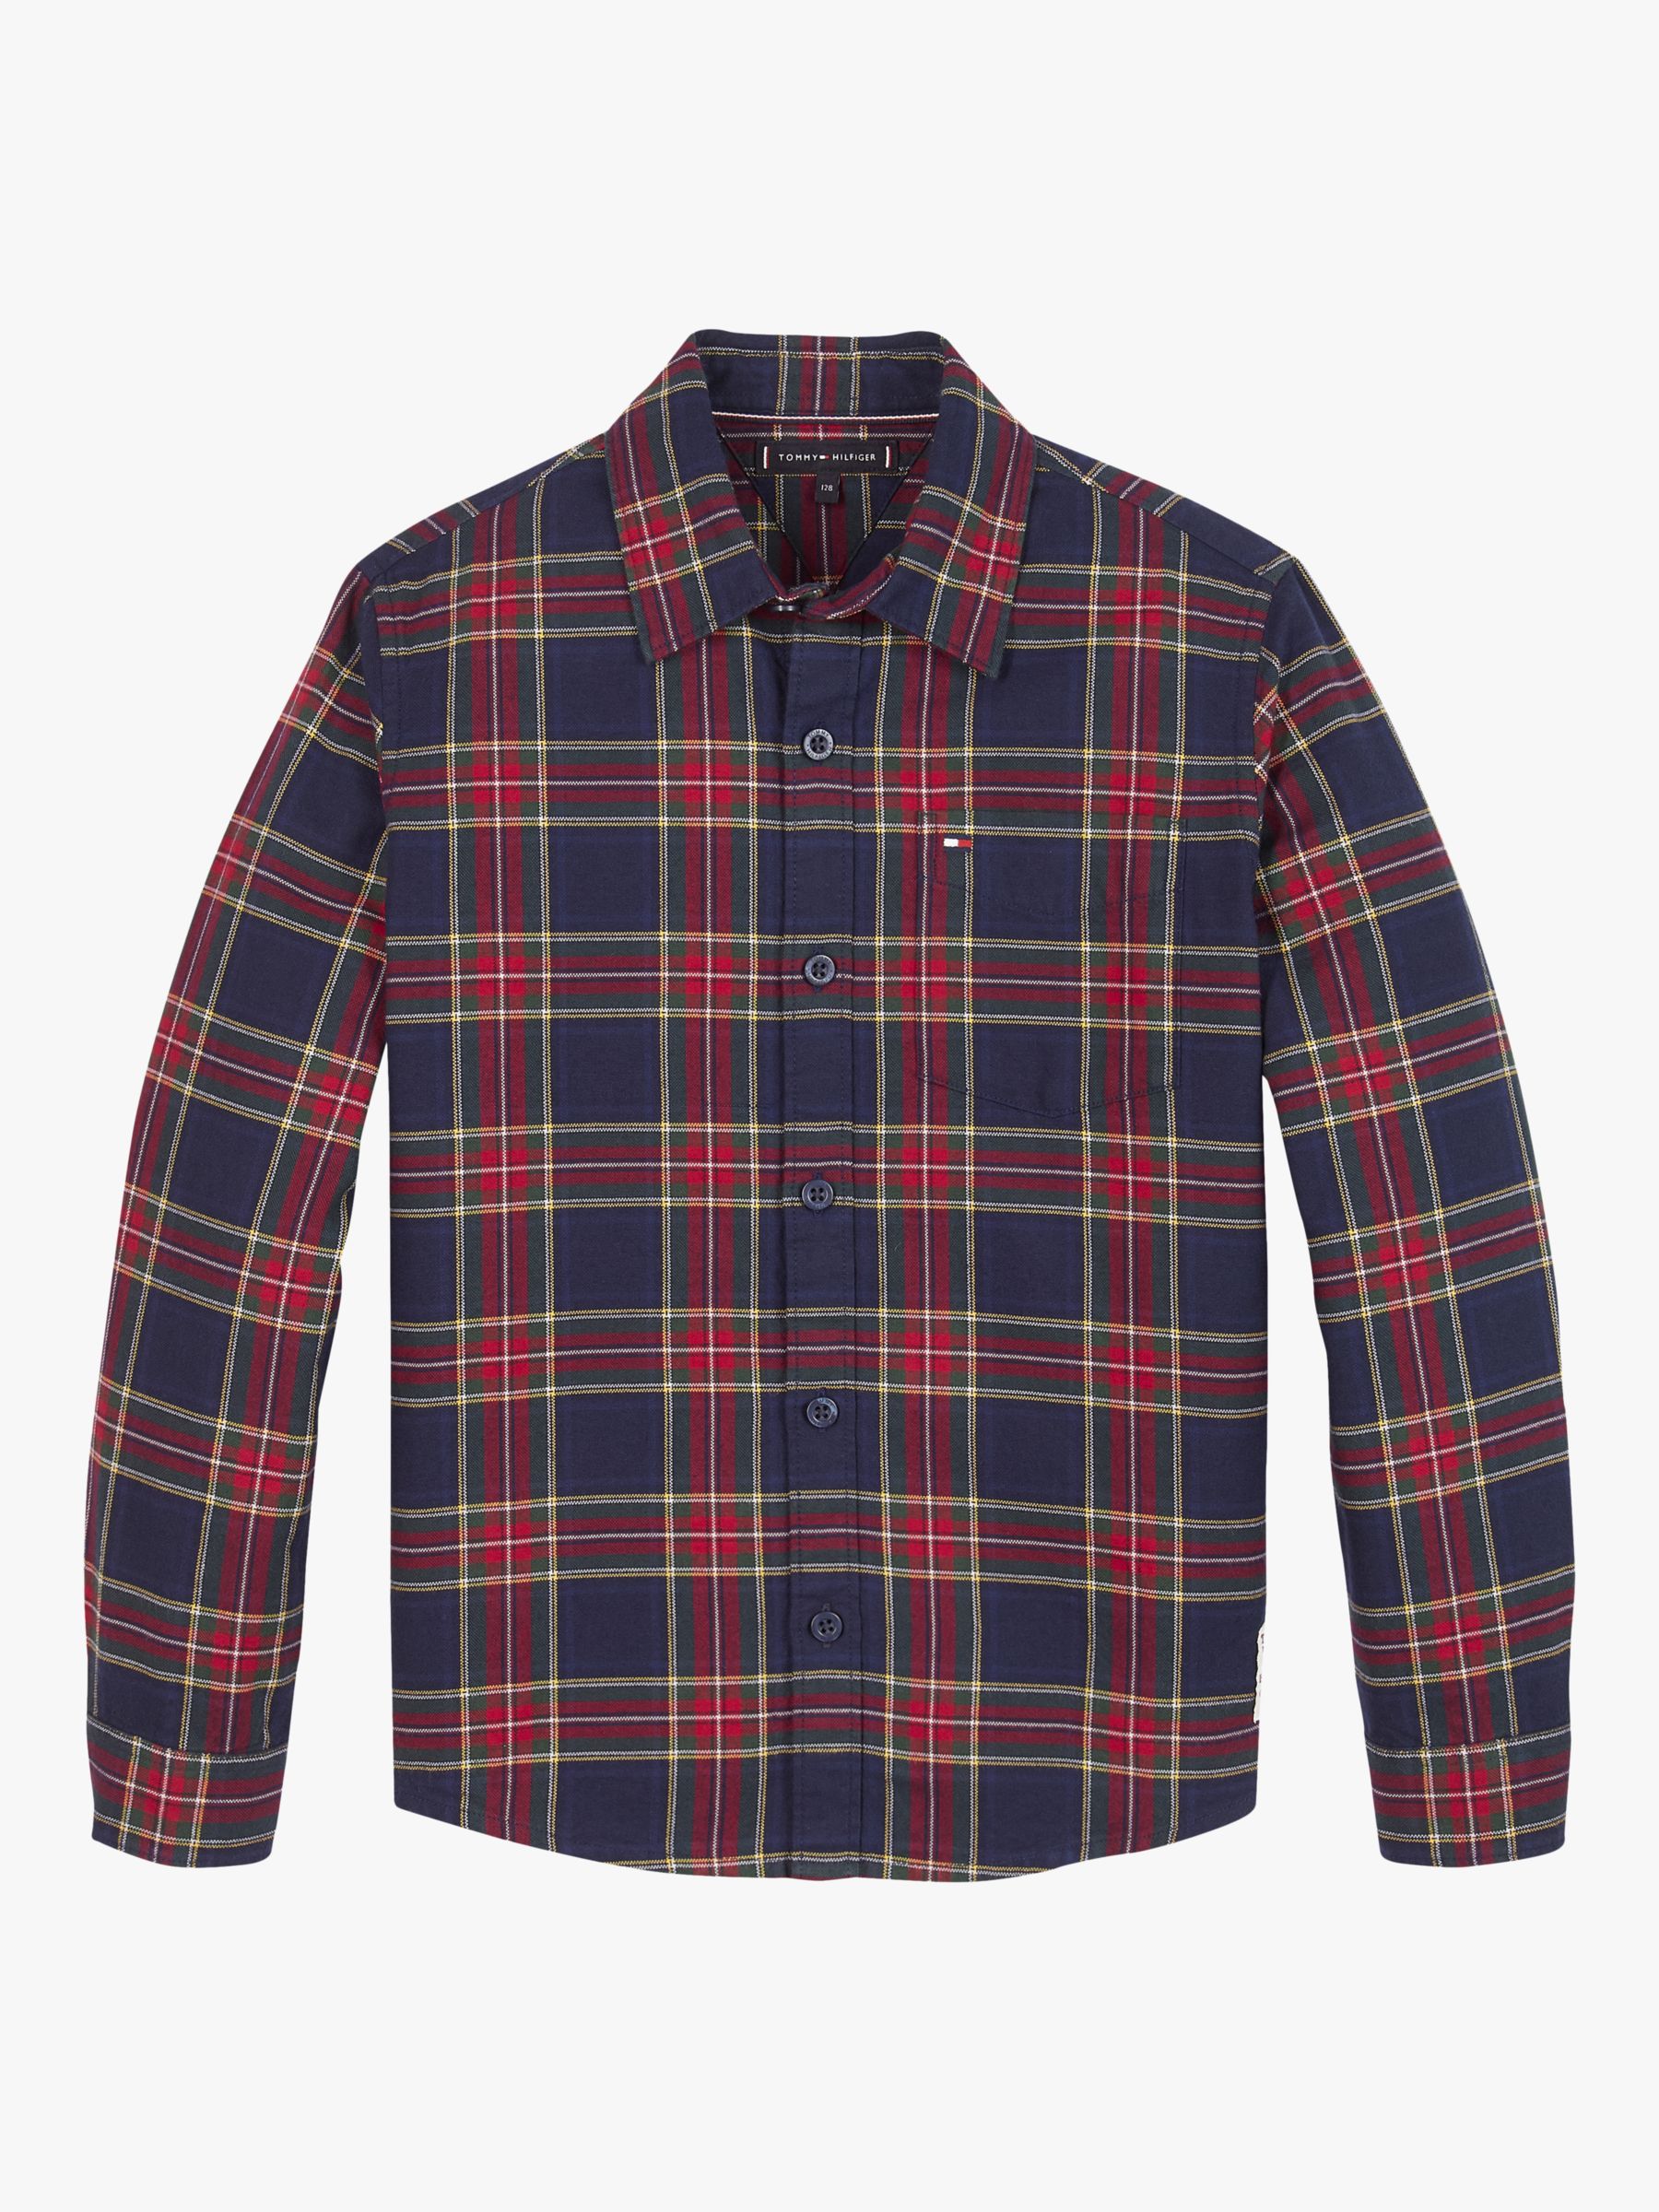 Image of Tommy Hilfiger Boys Oxford Check Shirt Red